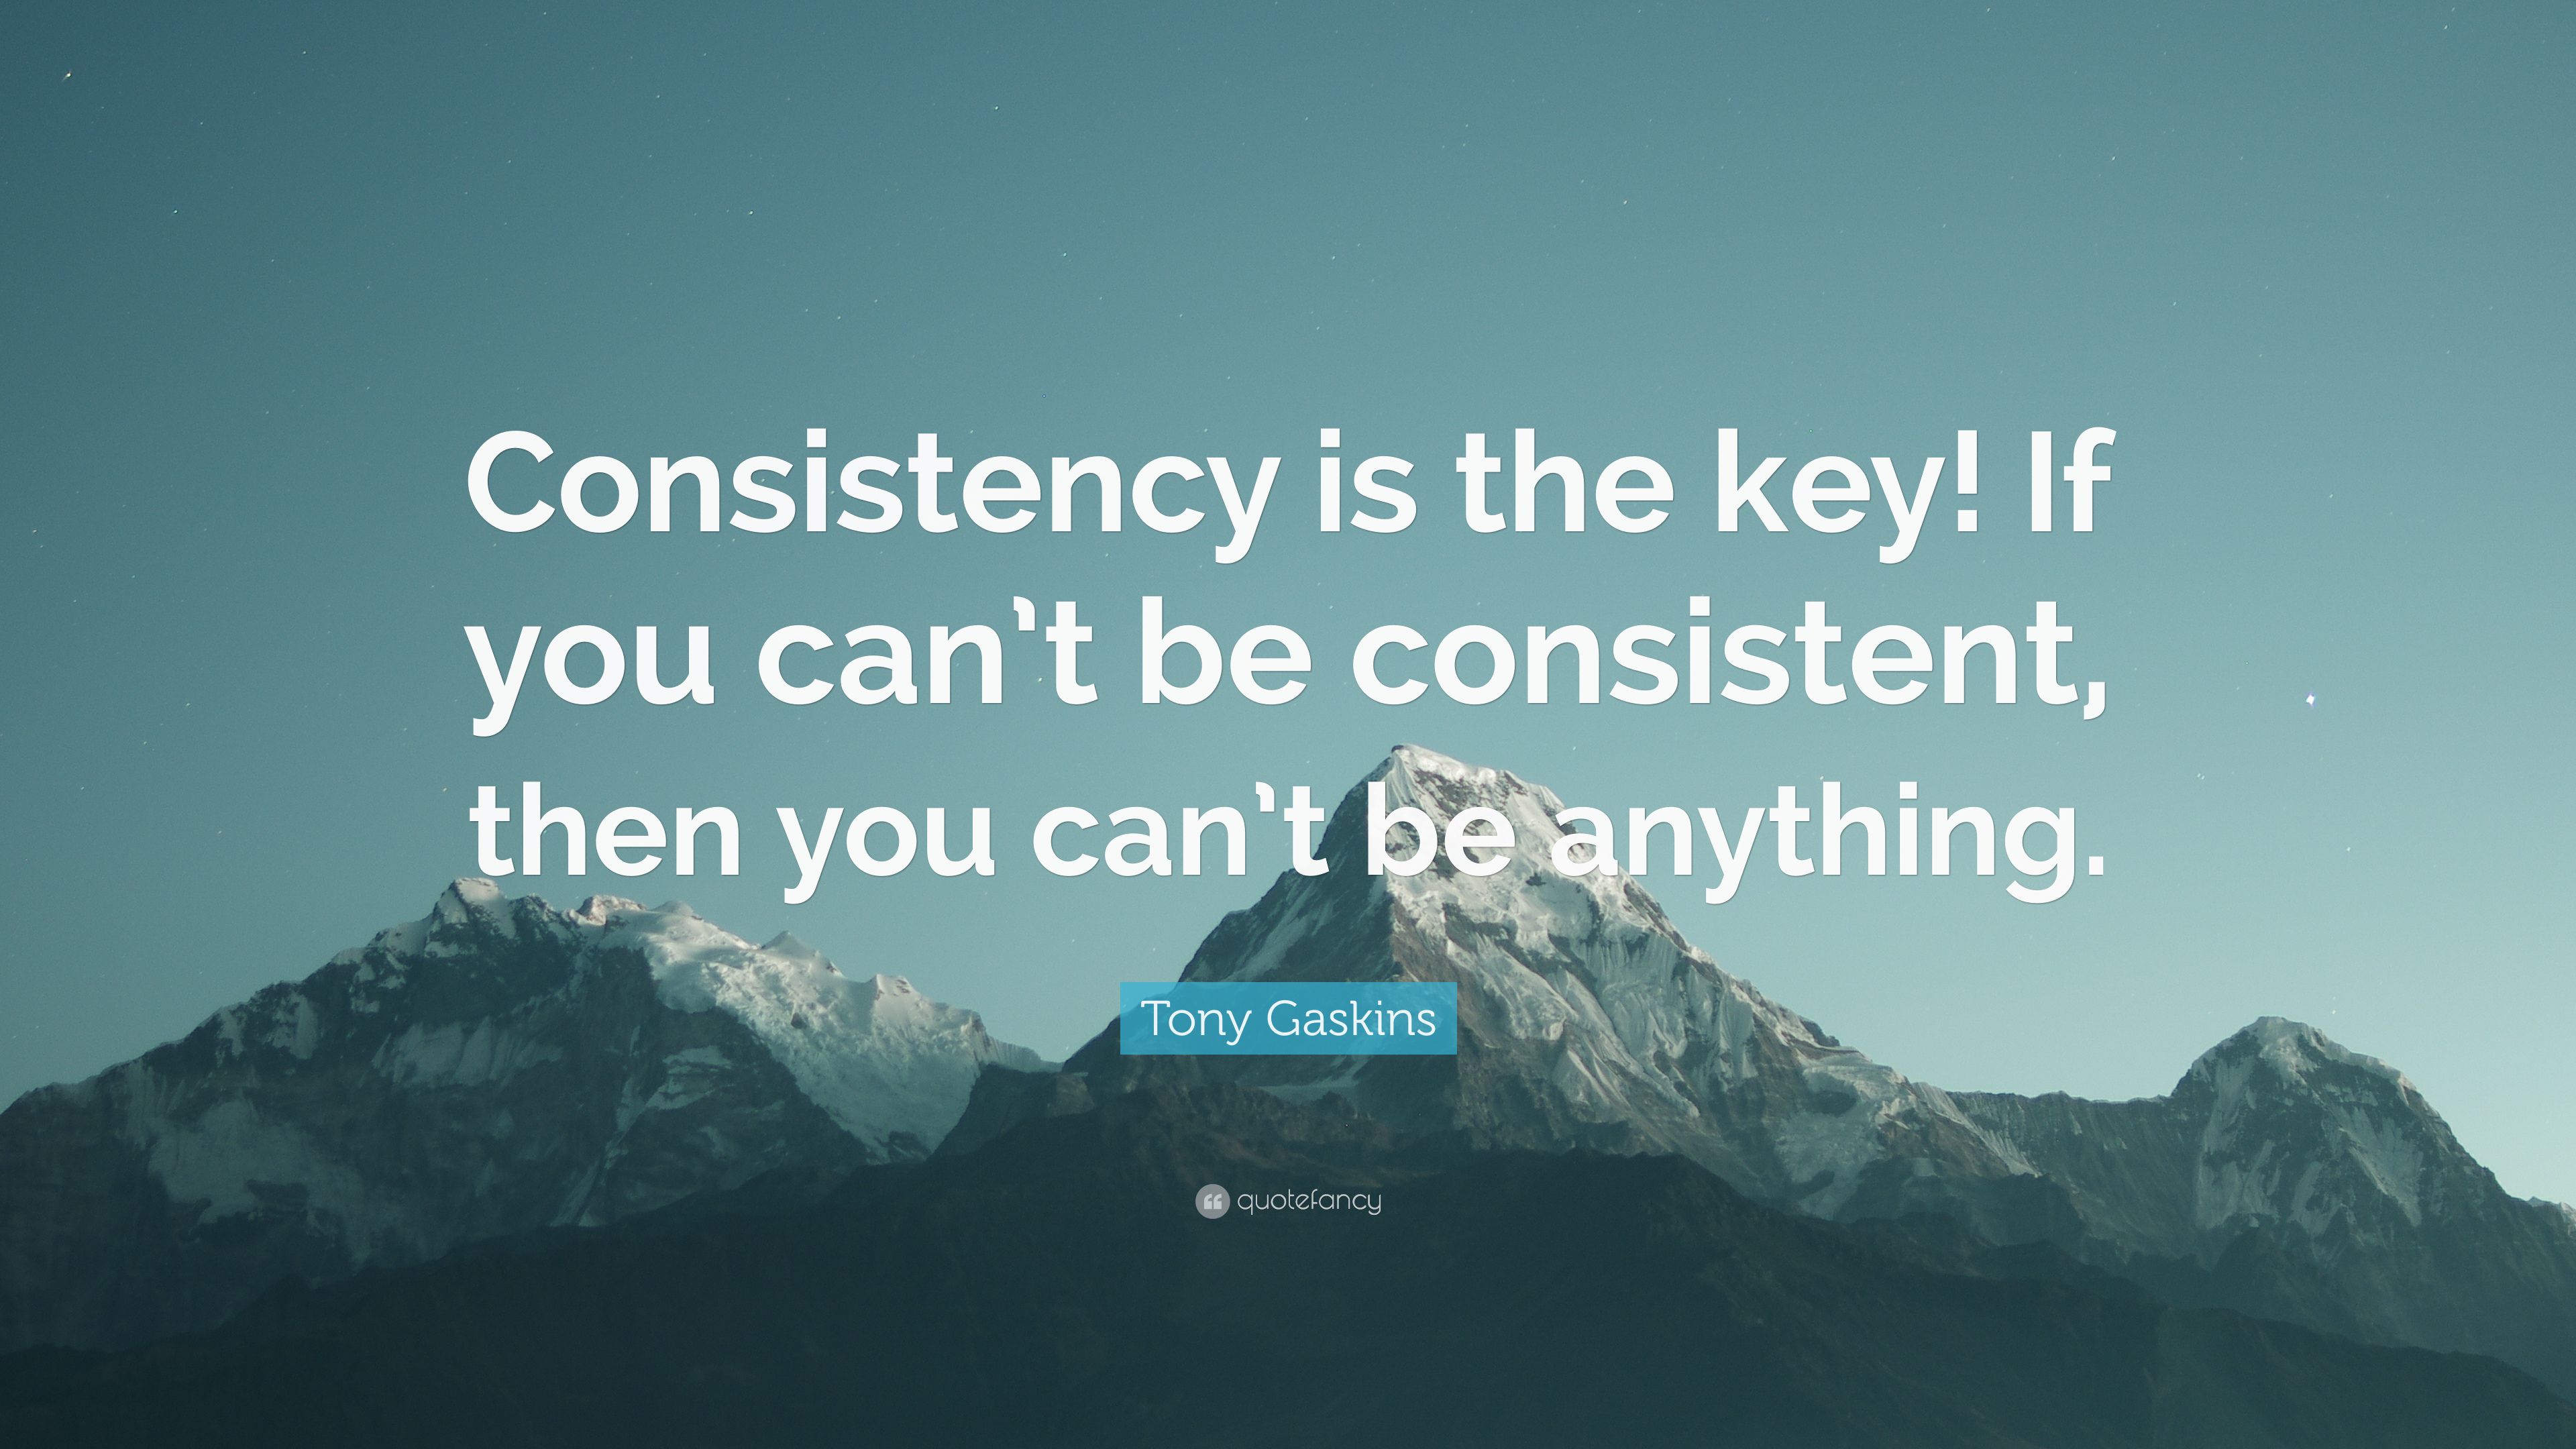 Tony Gaskins Quote: “Consistency is the key! If you can't be consistent, then you can't be anything.” (12 wallpaper)